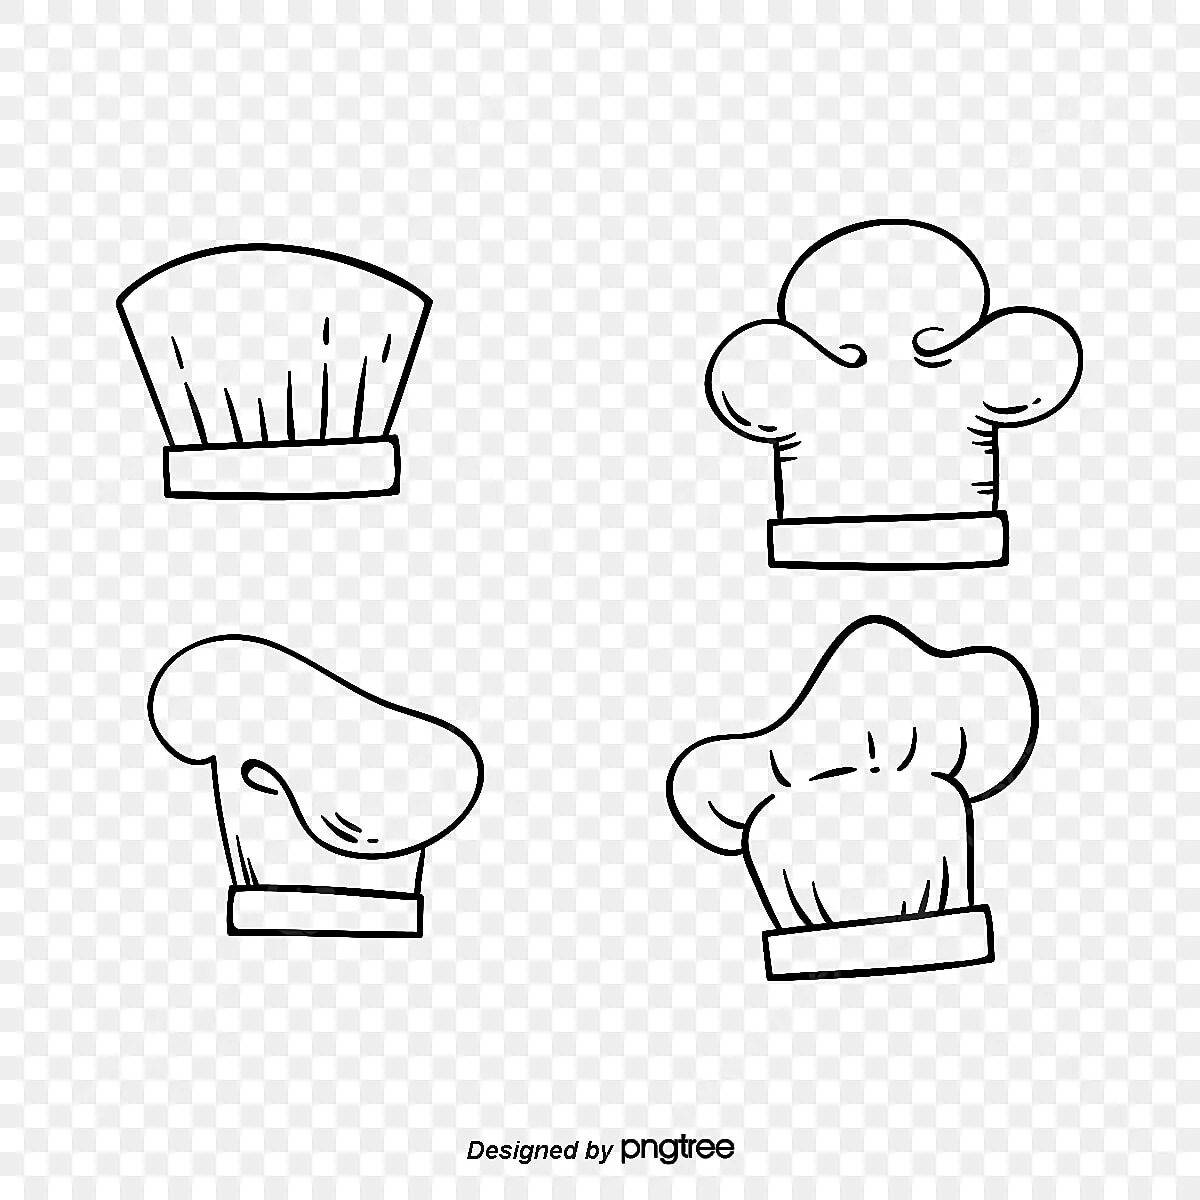 Coloring page elegant chef's hat